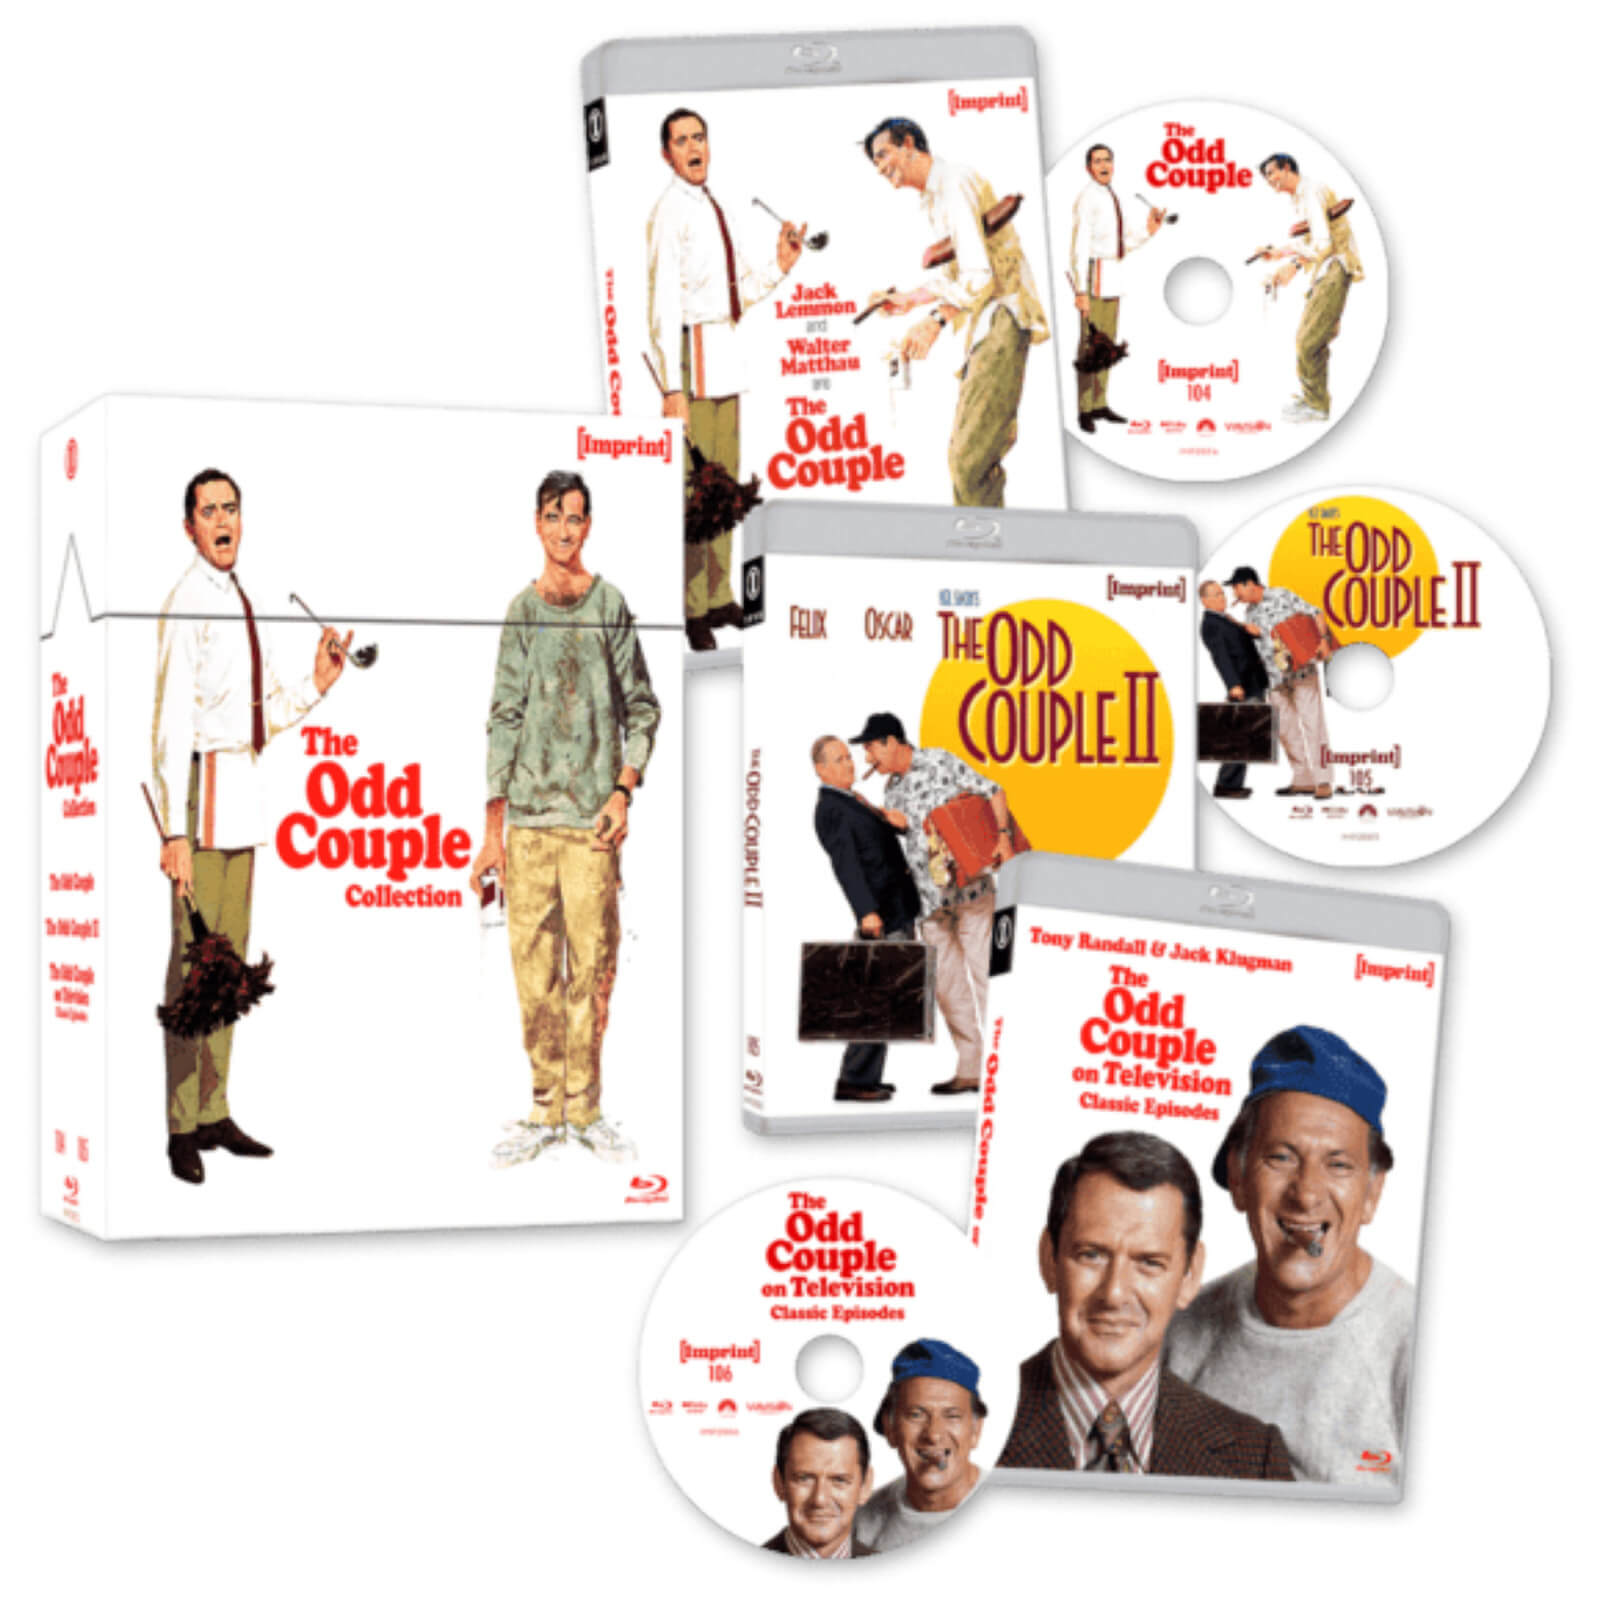 The Odd Couple Collection - Imprint Collection